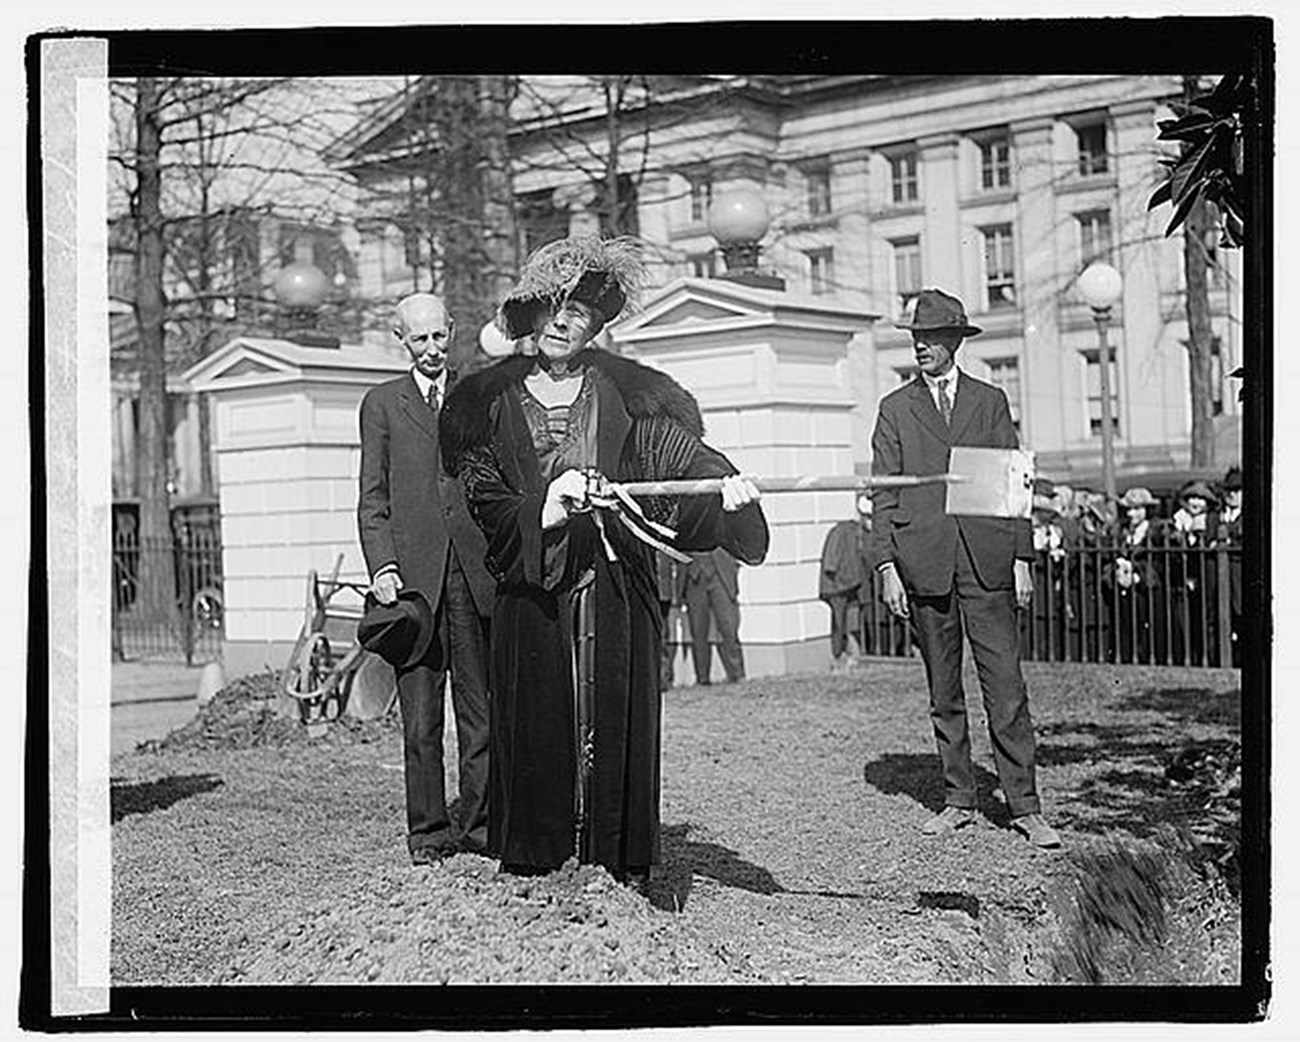 Florence Harding, in a fur coat and large, ornate hat, poses with a shovel in front of the Treasury Building near a White House gate.